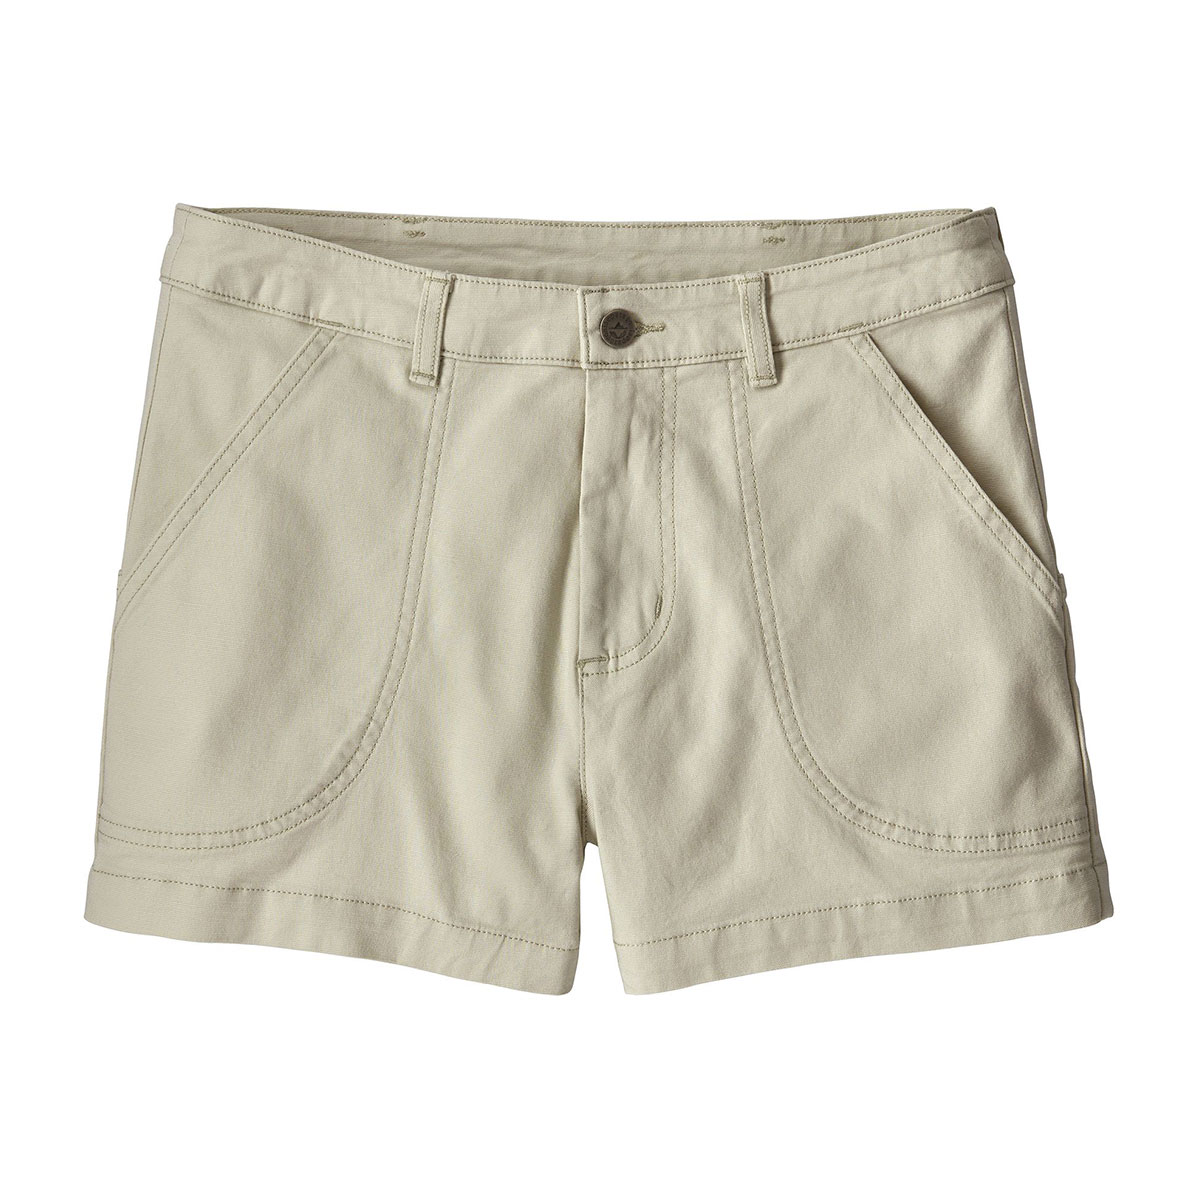 Backcountry North – Traverse City, MI | Patagonia Stand Up Shorts – Women’s